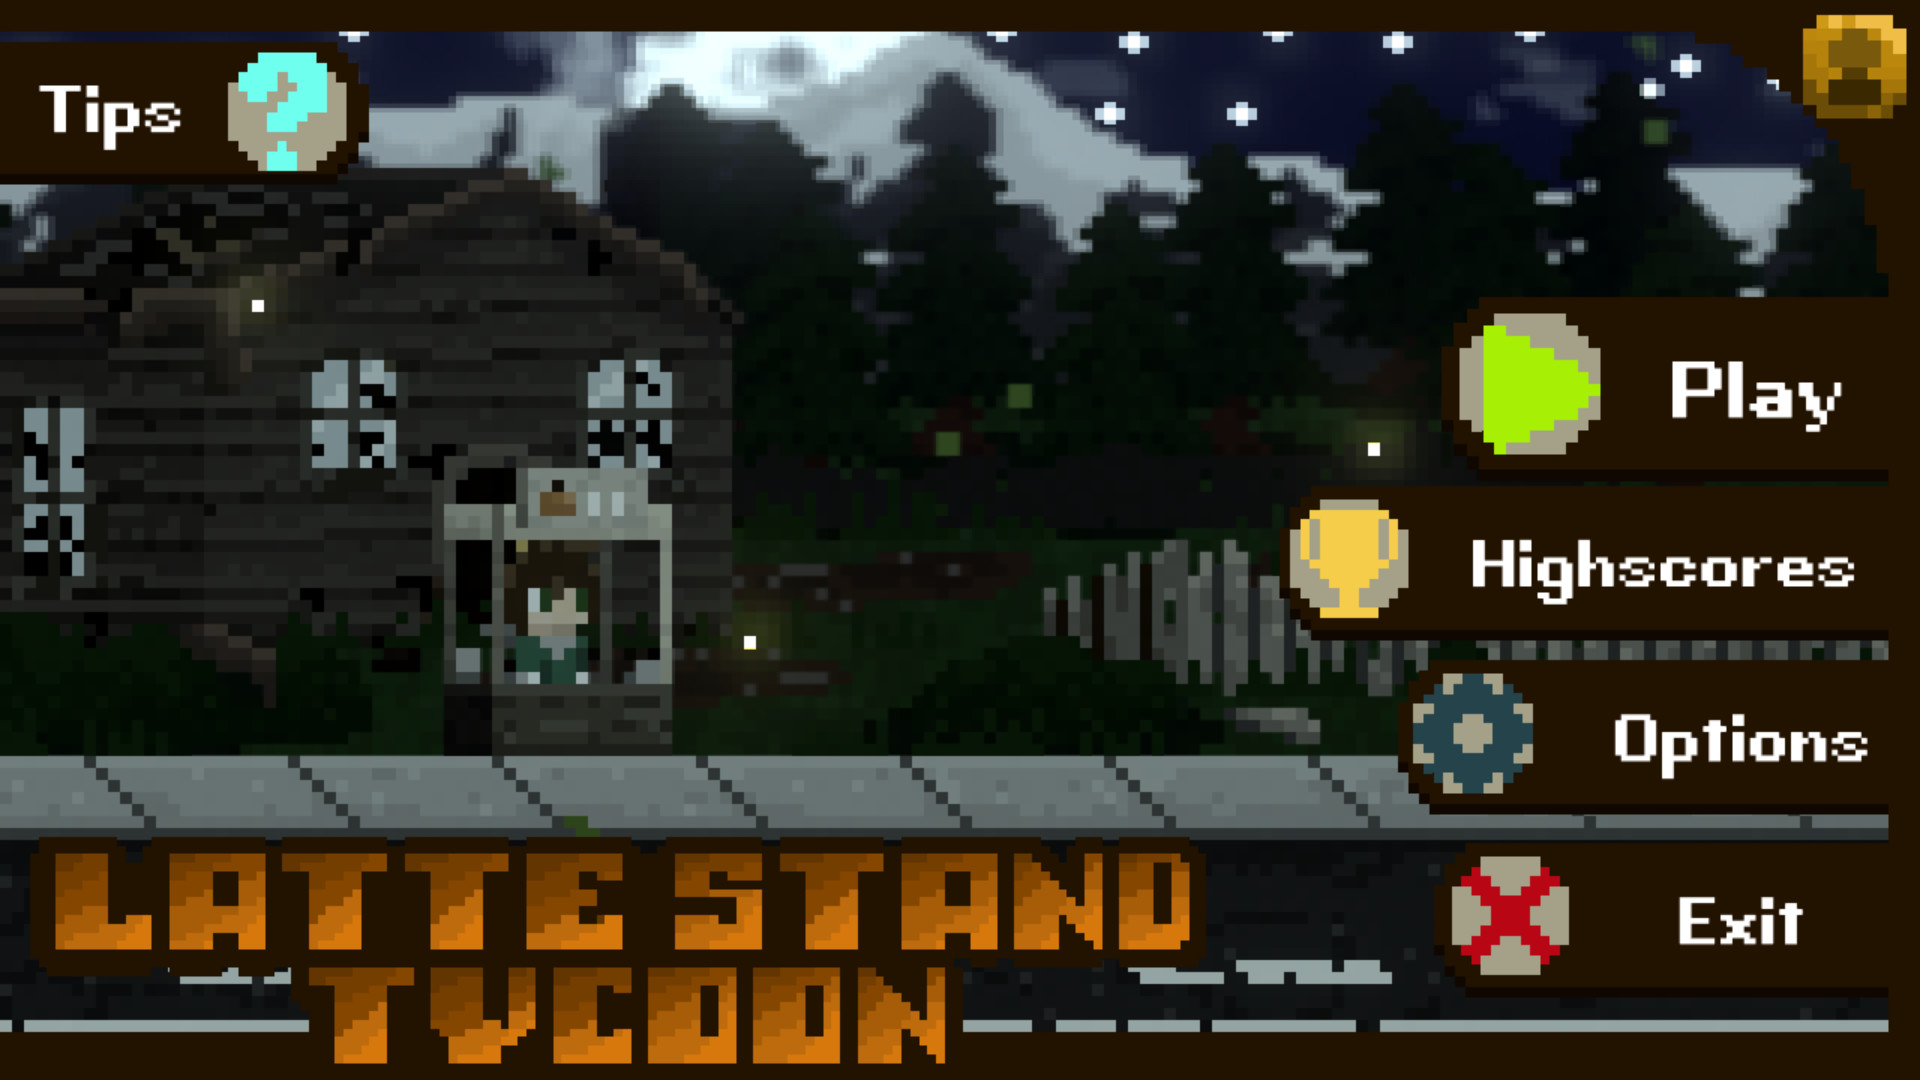 Latte Stand Tycoon Steam CD Key, 0.7$